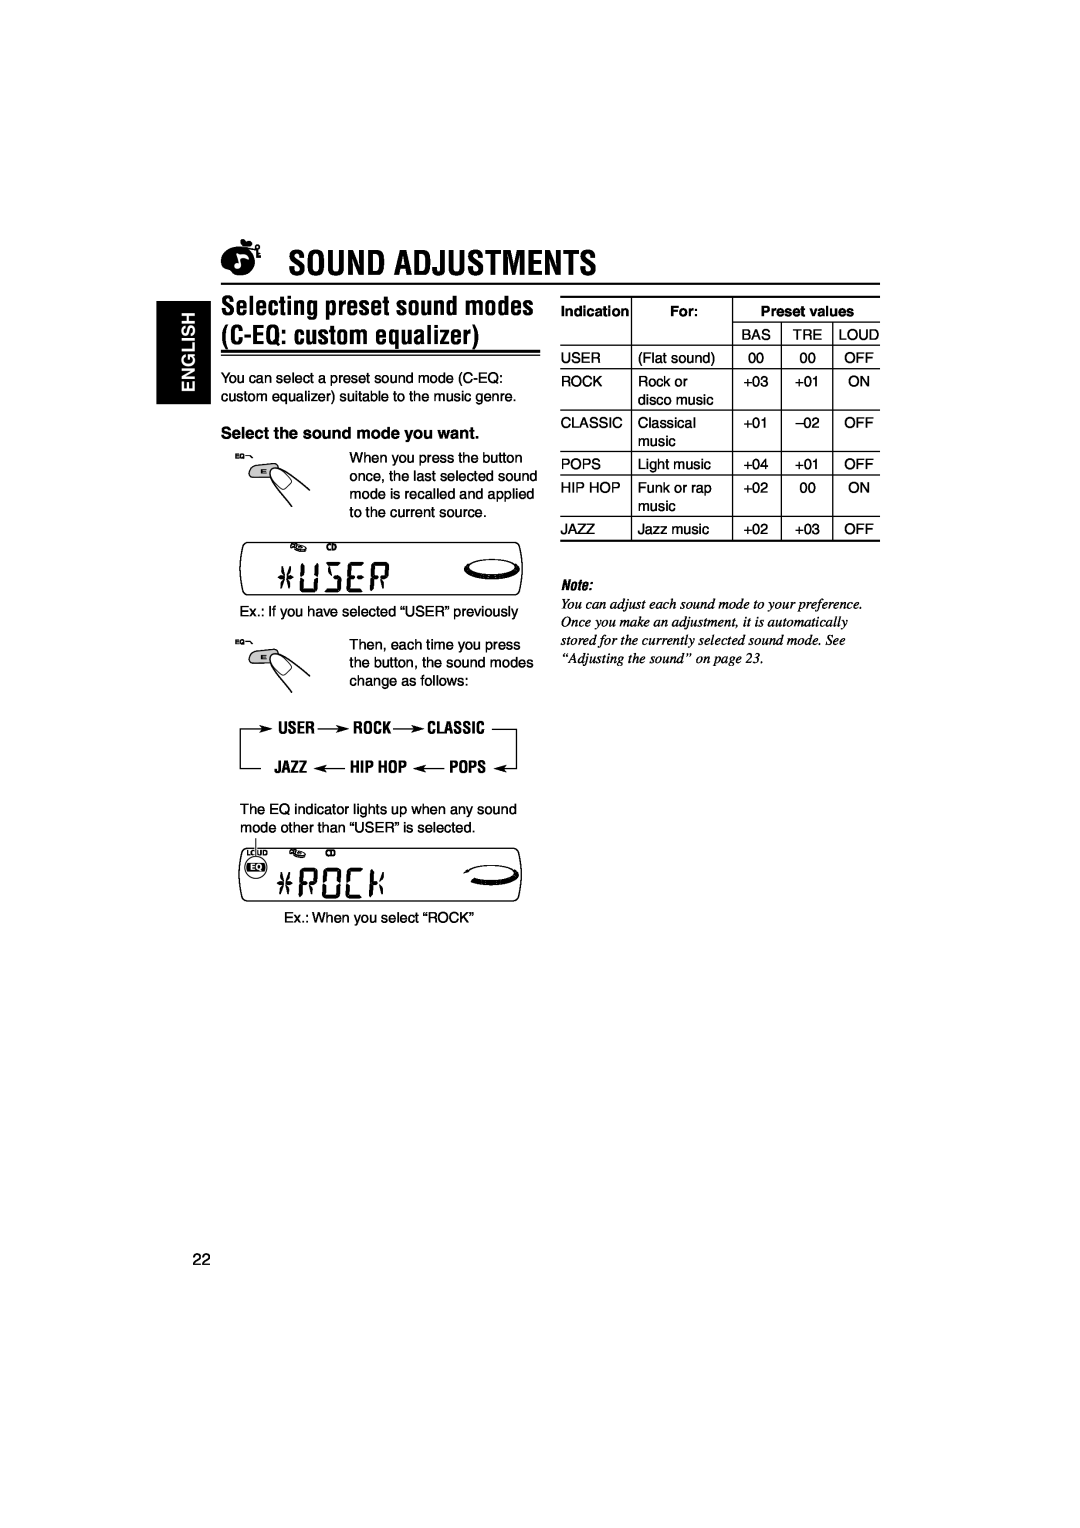 JVC KD-S890 Sound Adjustments, English, Select the sound mode you want, User Rock Classic Jazz Hip Hop Pops, Preset values 